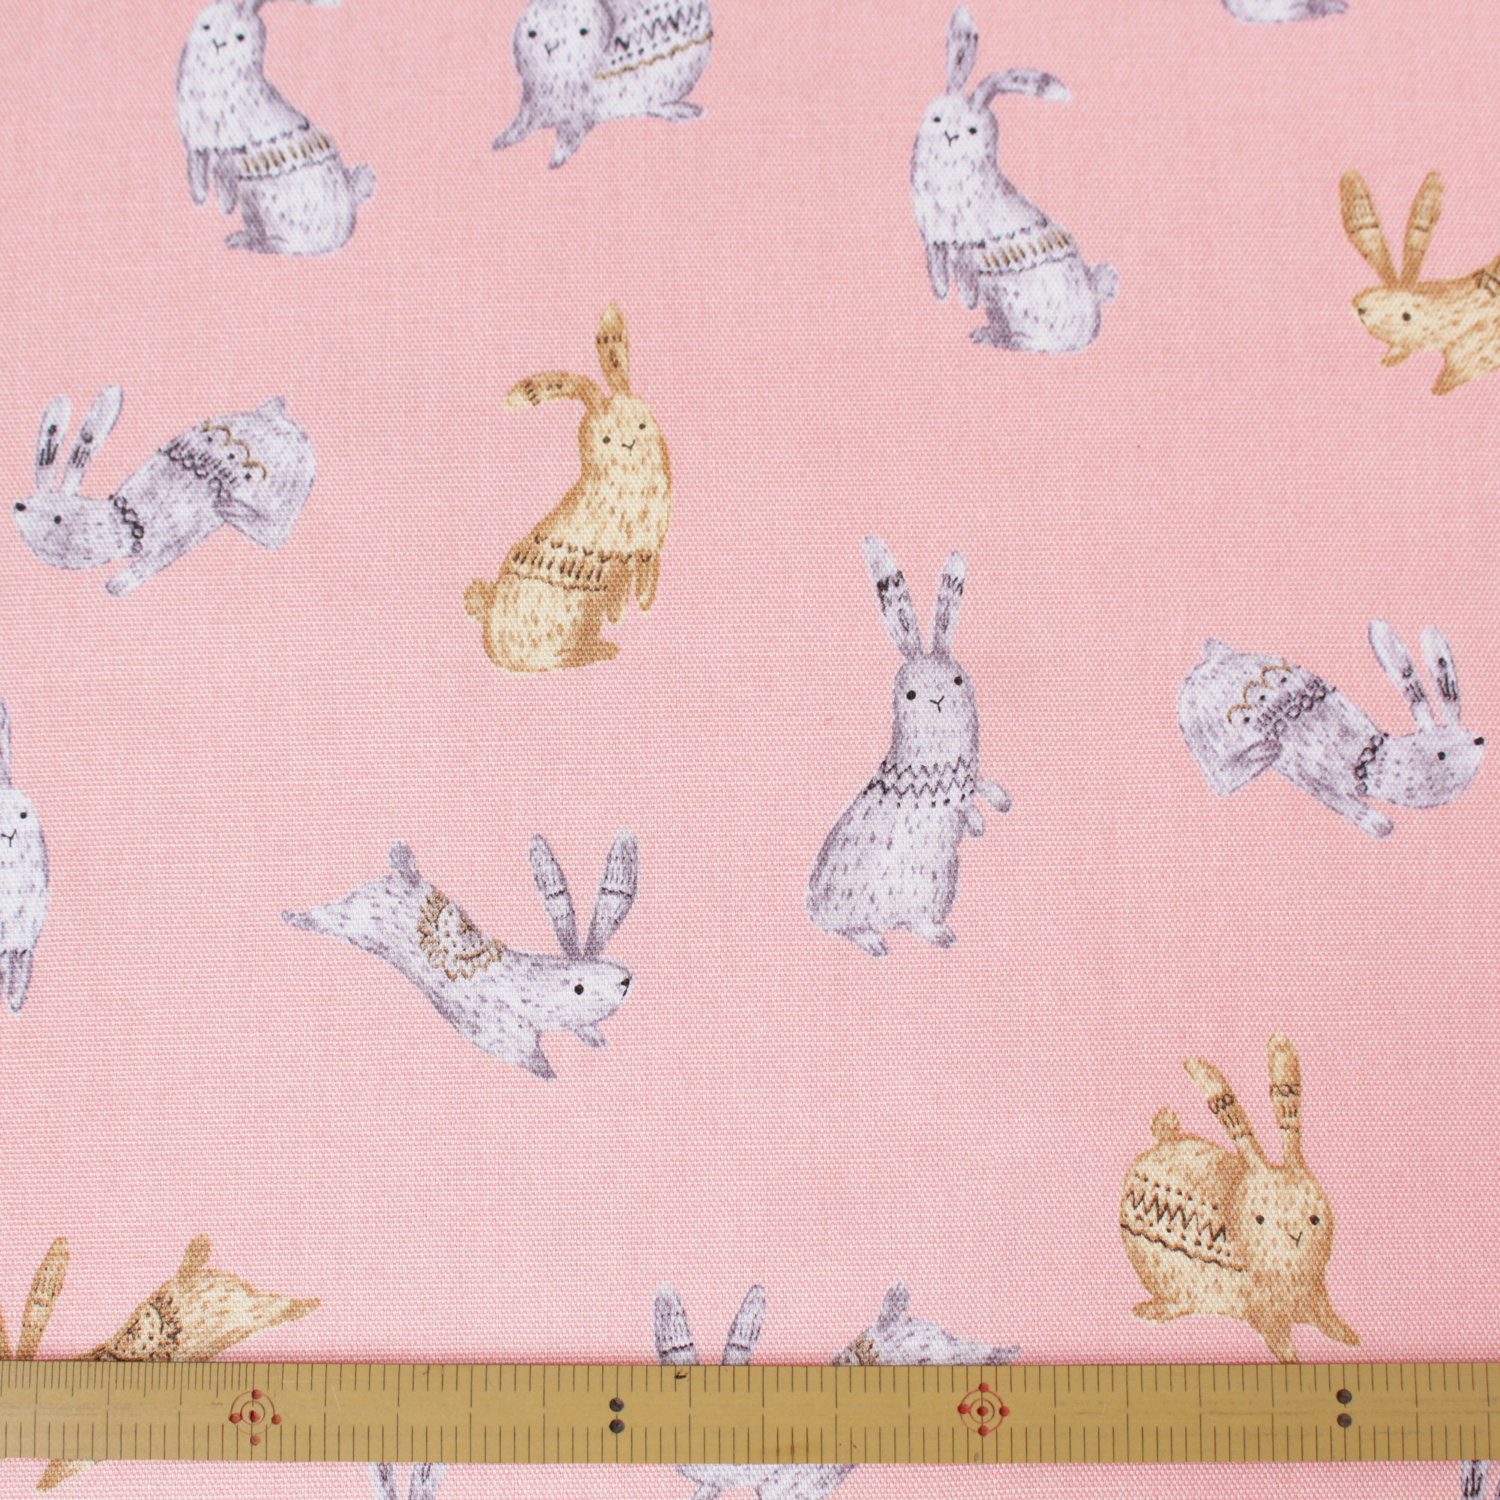 [Only on Online Shop]■7096-2B Cotton OX Fabric rabbit pink width 110cm （roll）